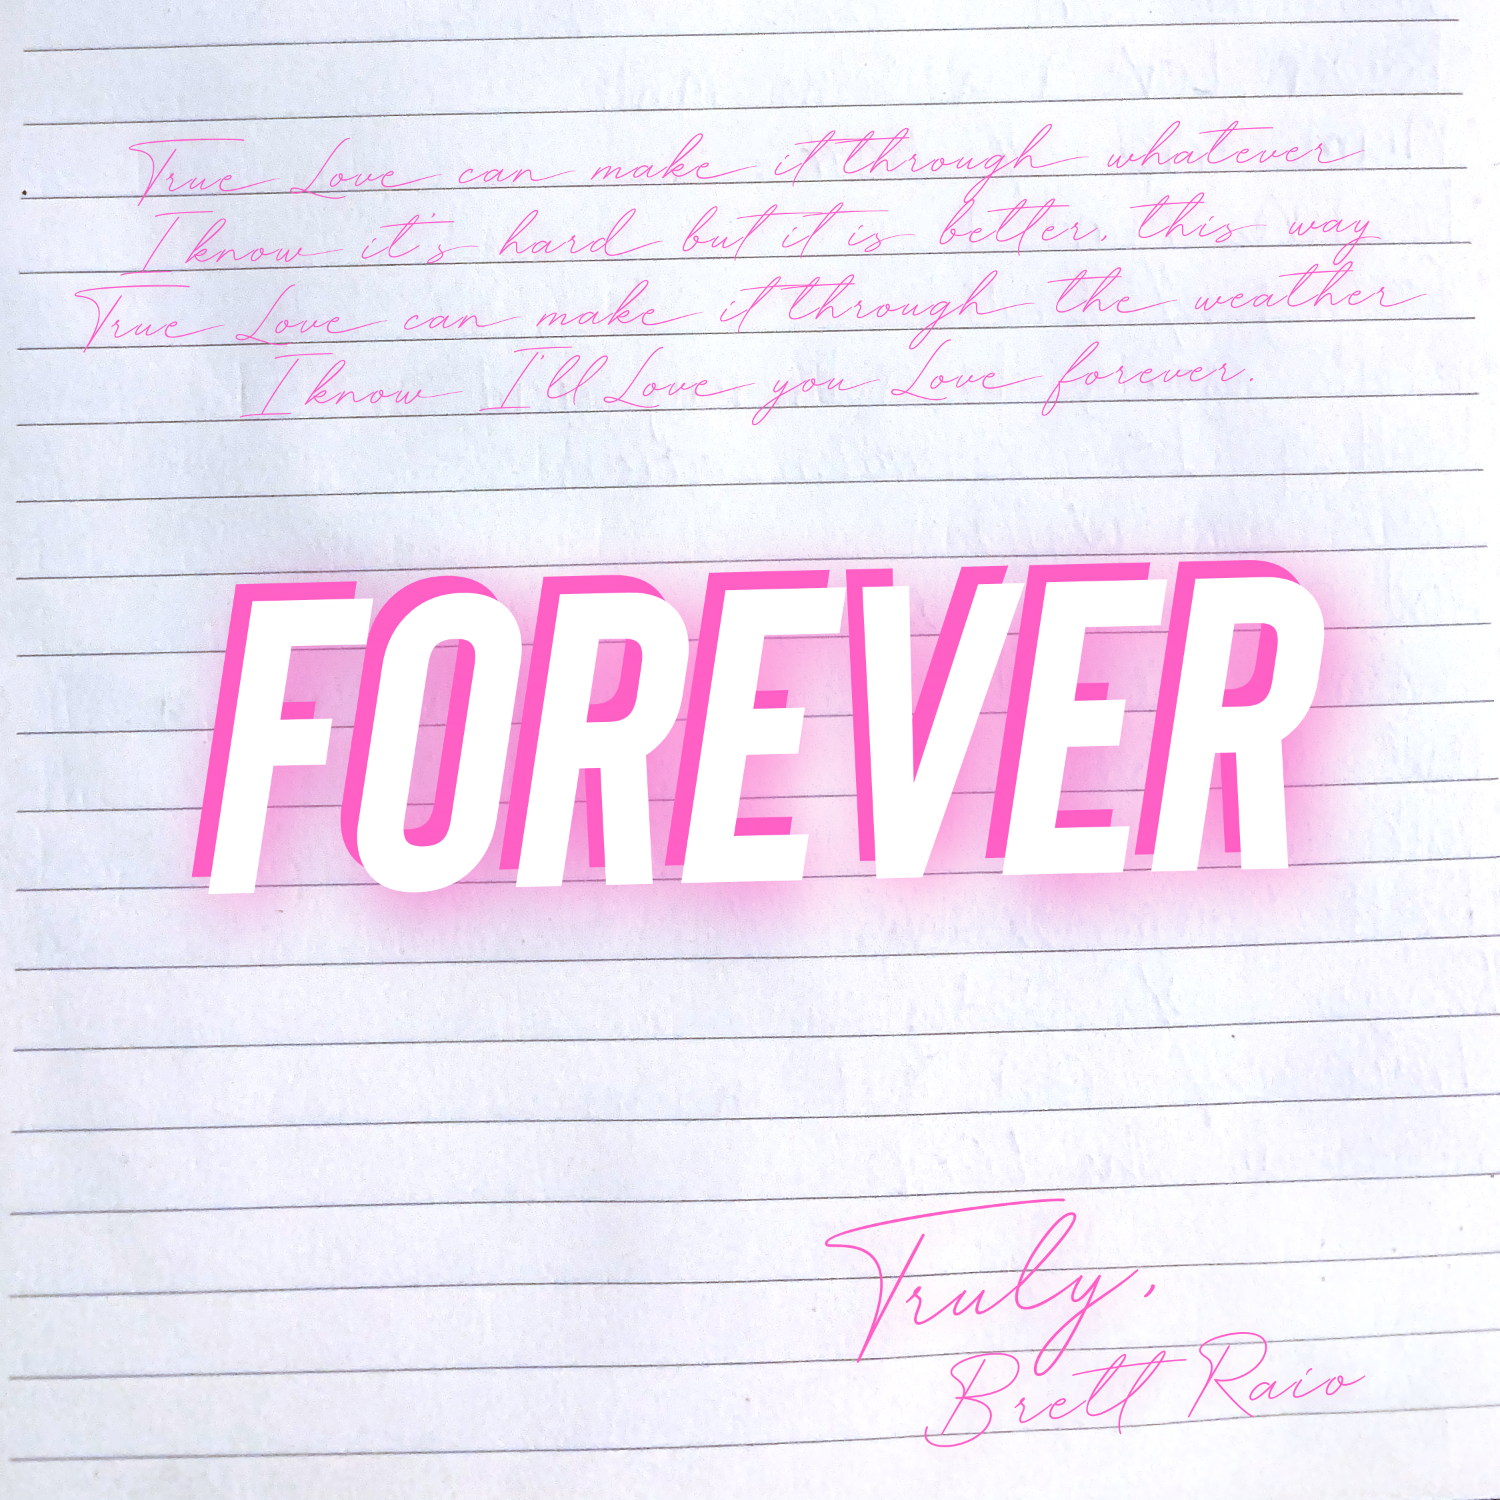 BRETT RAIO’S LATEST RELEASE “FOREVER” HIGHLIGHTS THE POWER OF TRUE LOVE AND FAITH – Review